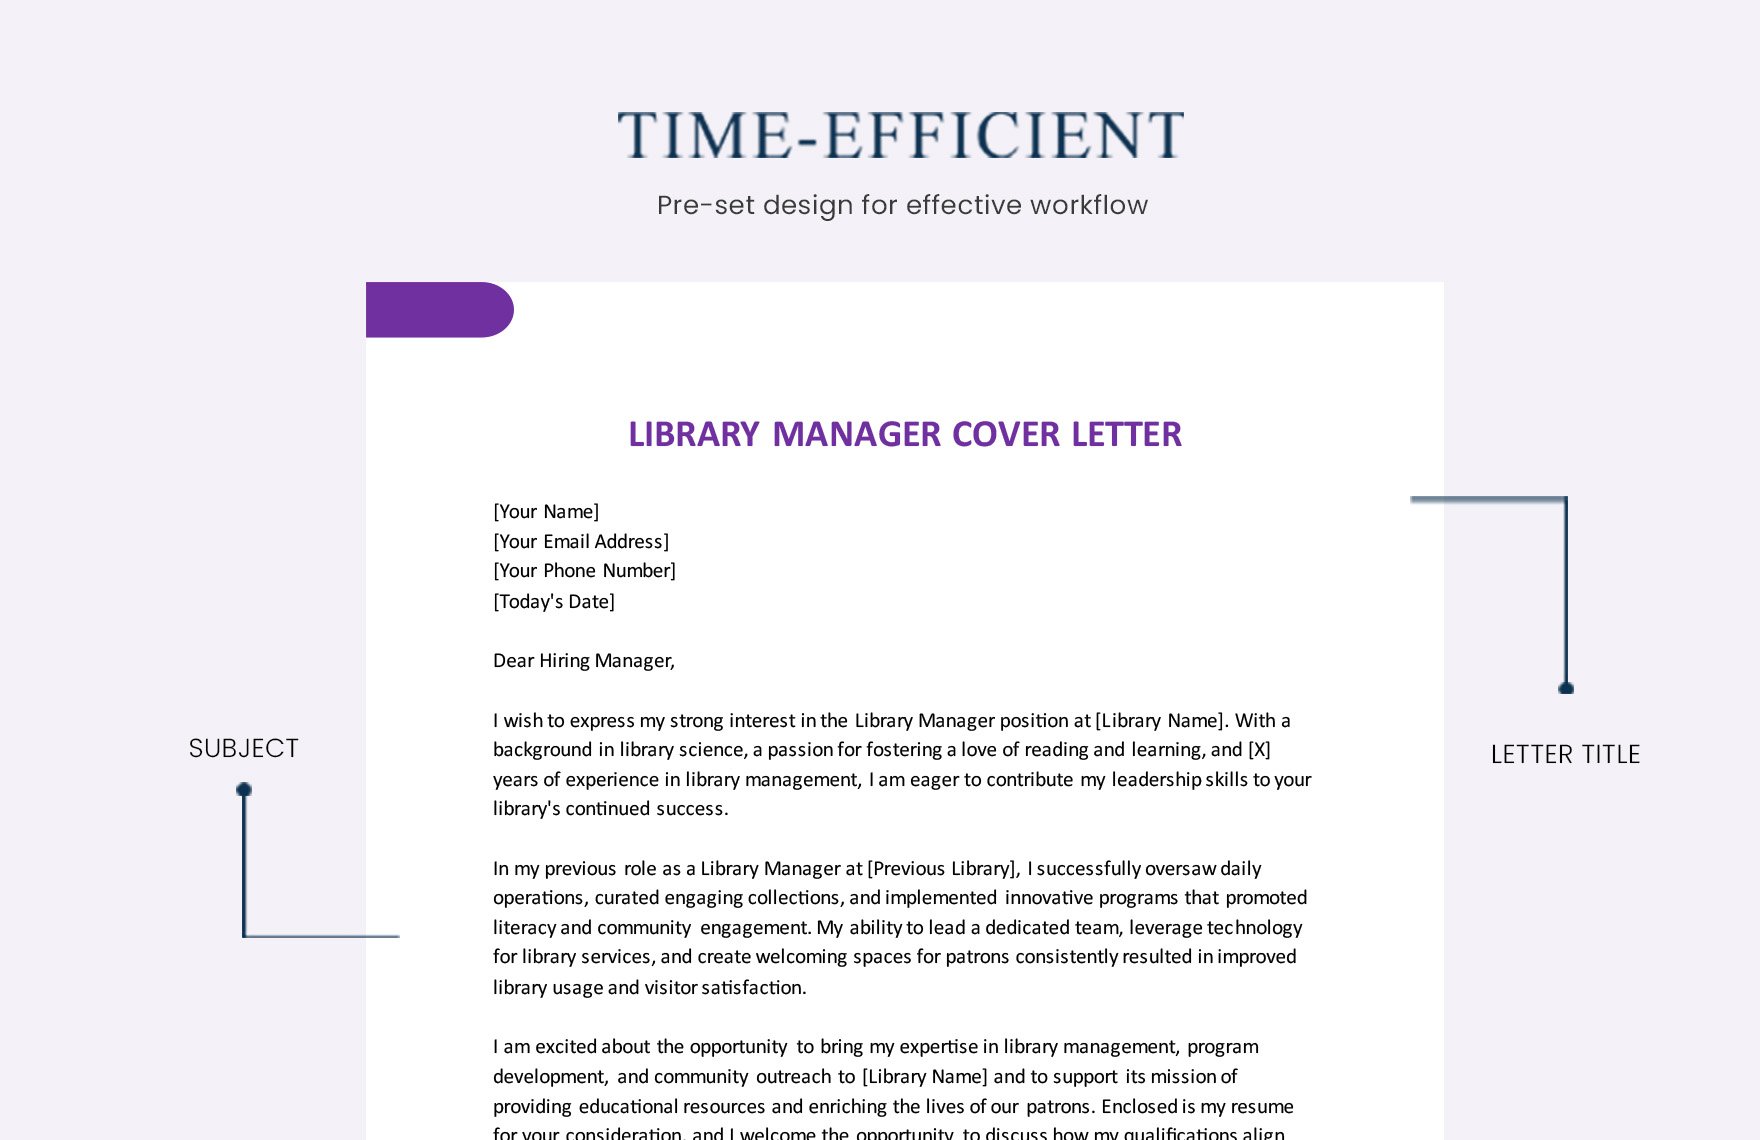 Library Manager Cover Letter